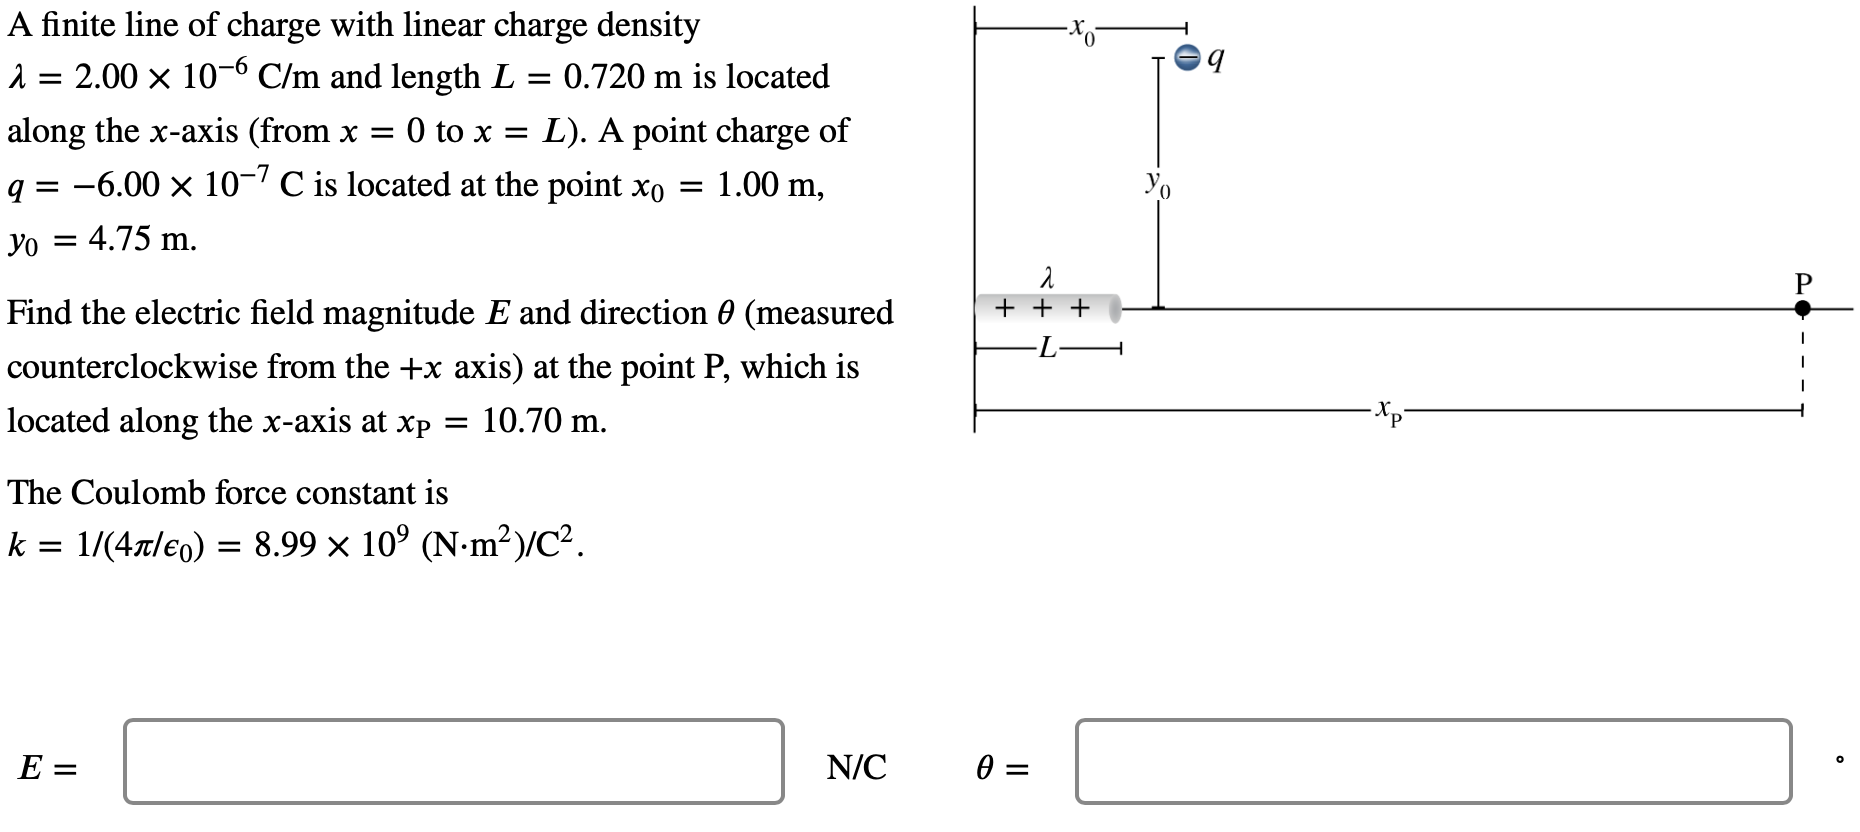 A finite line of charge with linear charge density λ = 2.00×10−6 C/m and length L = 0.720 m is located along the x-axis (from x = 0 to x = L). A point charge of q = −6.00×10−7 C is located at the point x0 = 1.00 m, y0 = 4.75 m. Find the electric field magnitude E and direction θ (measured counterclockwise from the +x axis) at the point P, which is located along the x-axis at xP = 10.70 m. The Coulomb force constant is k = 1/(4πϵ0) = 8.99×109 (N⋅m2)/C2. E = N/C θ =